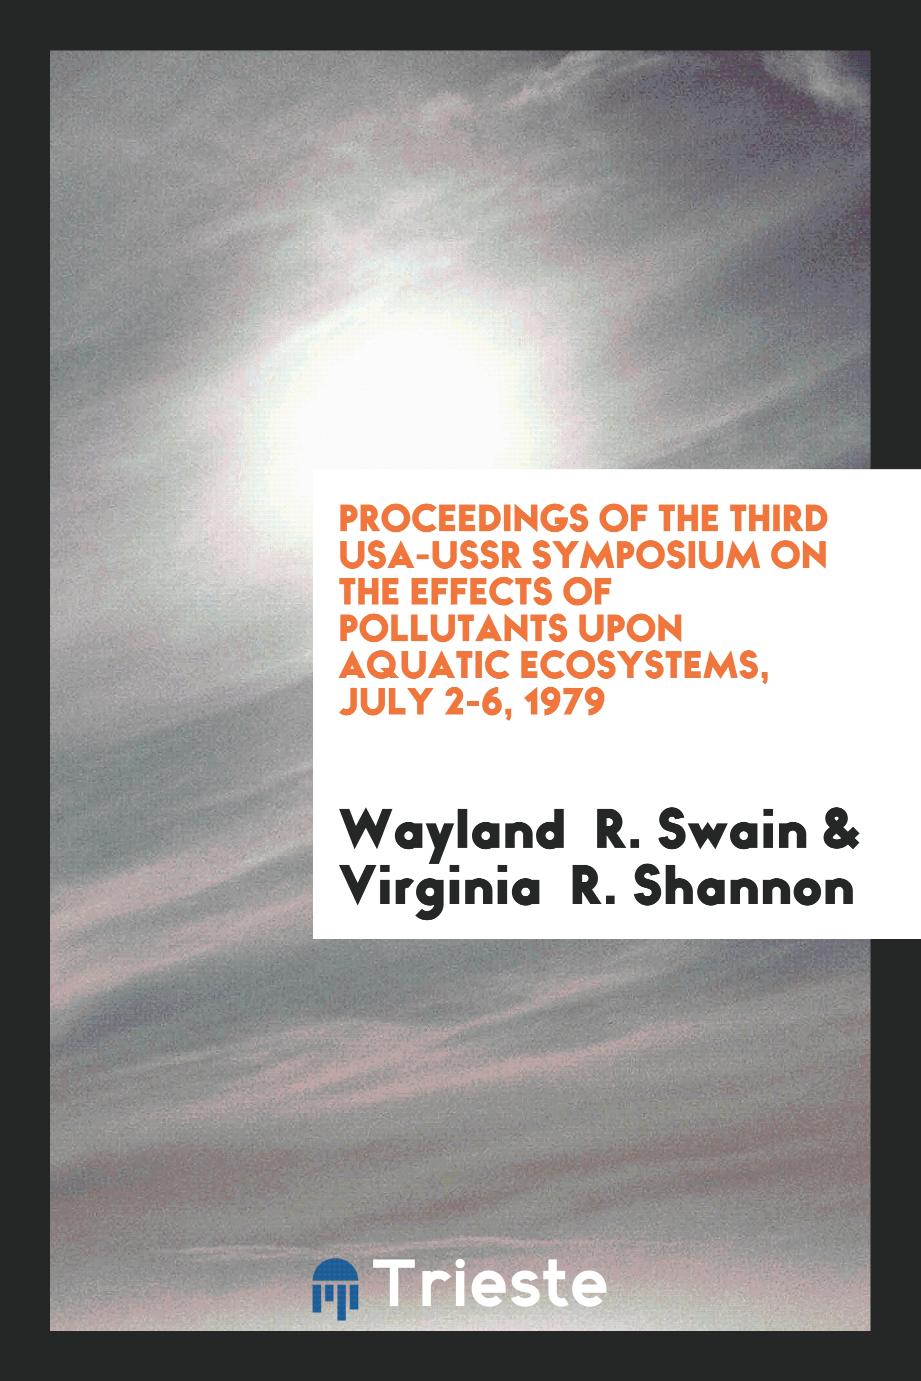 Proceedings of the third USA-USSR symposium on the effects of pollutants upon aquatic ecosystems, July 2-6, 1979